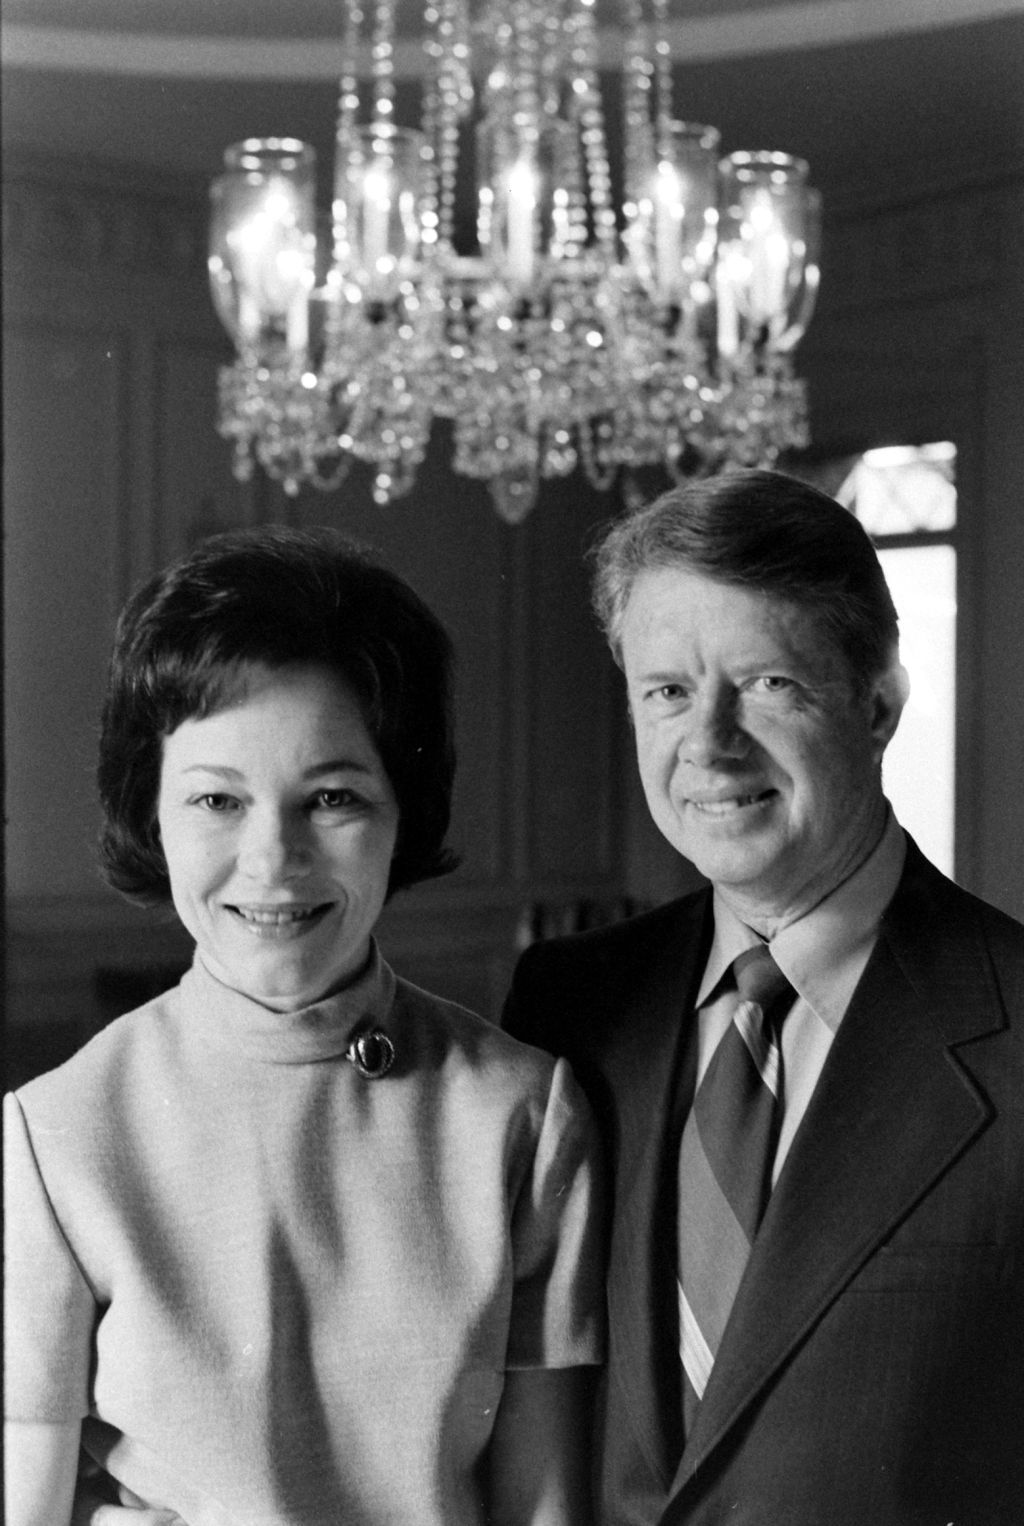 Jimmy Carter and Rosalynn Carter in 1971